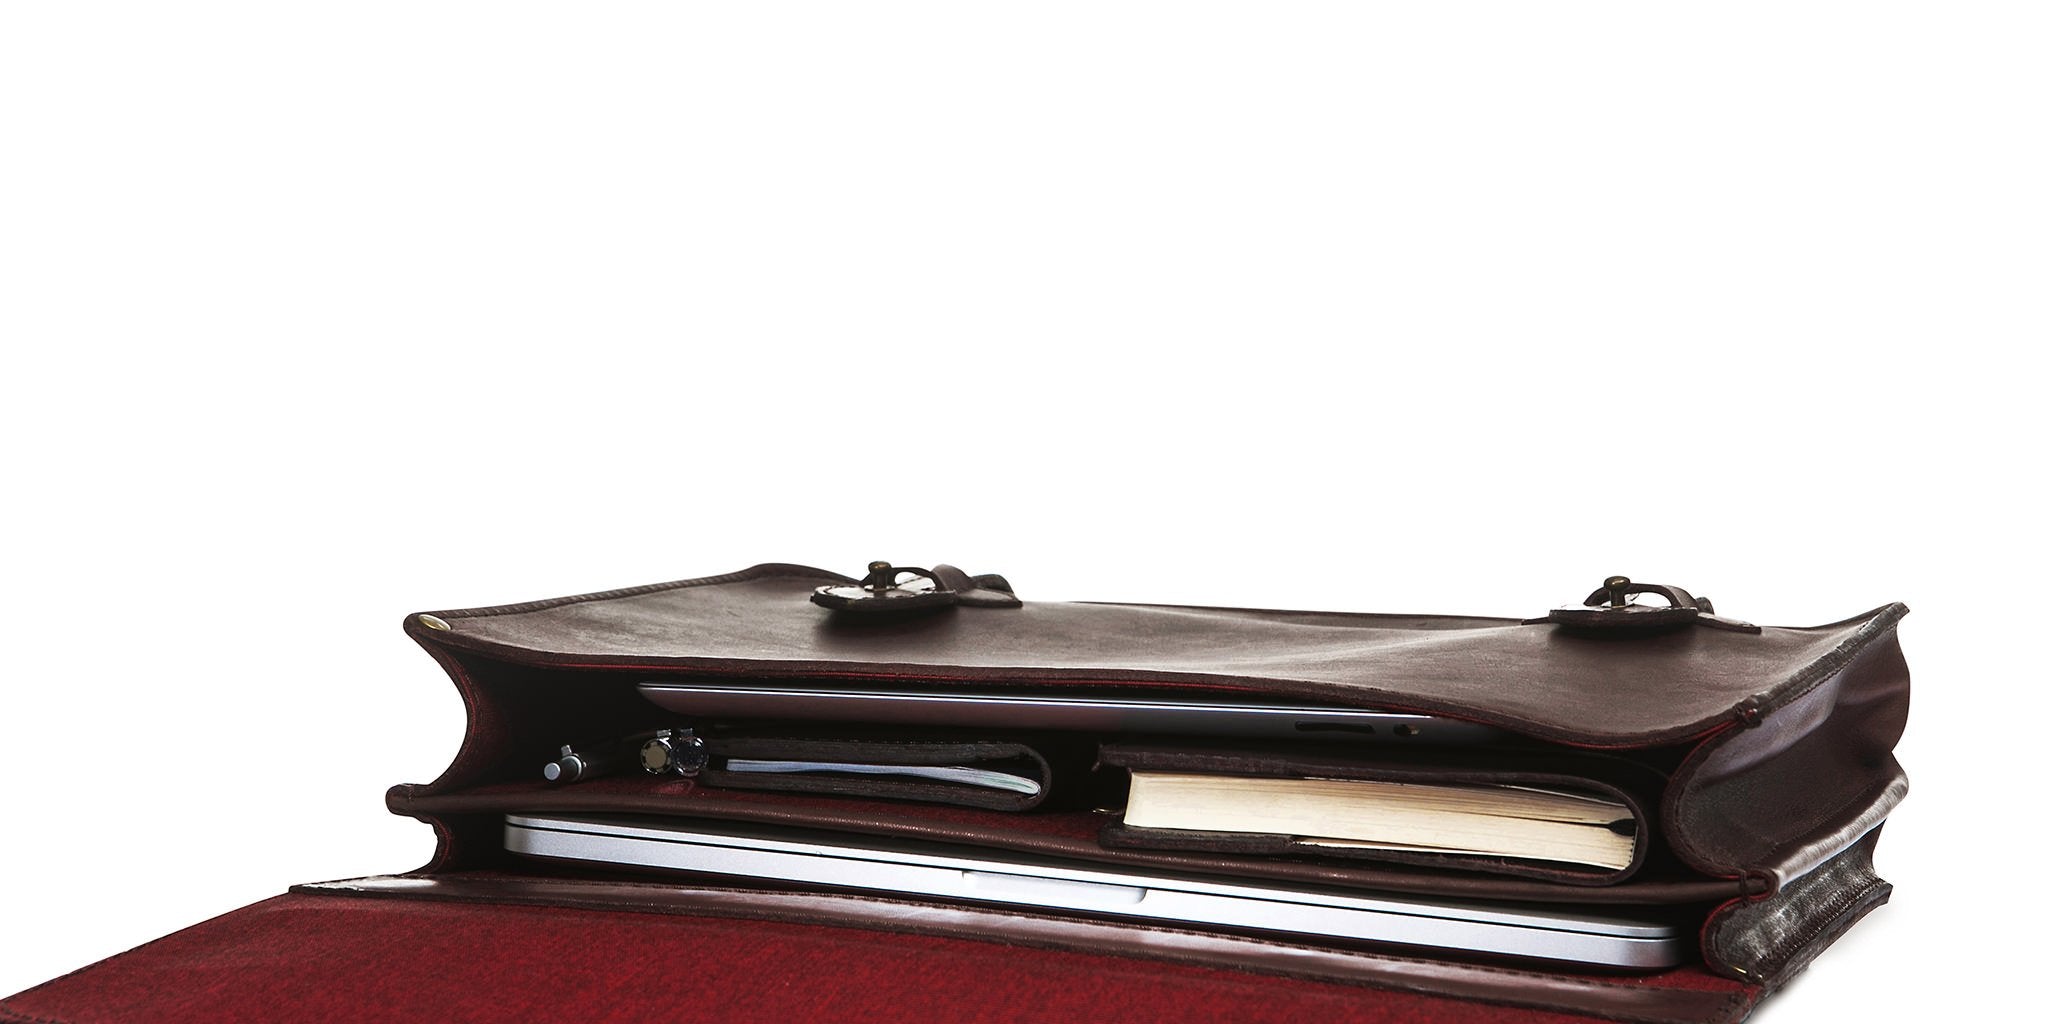 The rear compartment is narrower to efficiently hold your laptop and leave more space for everything else.